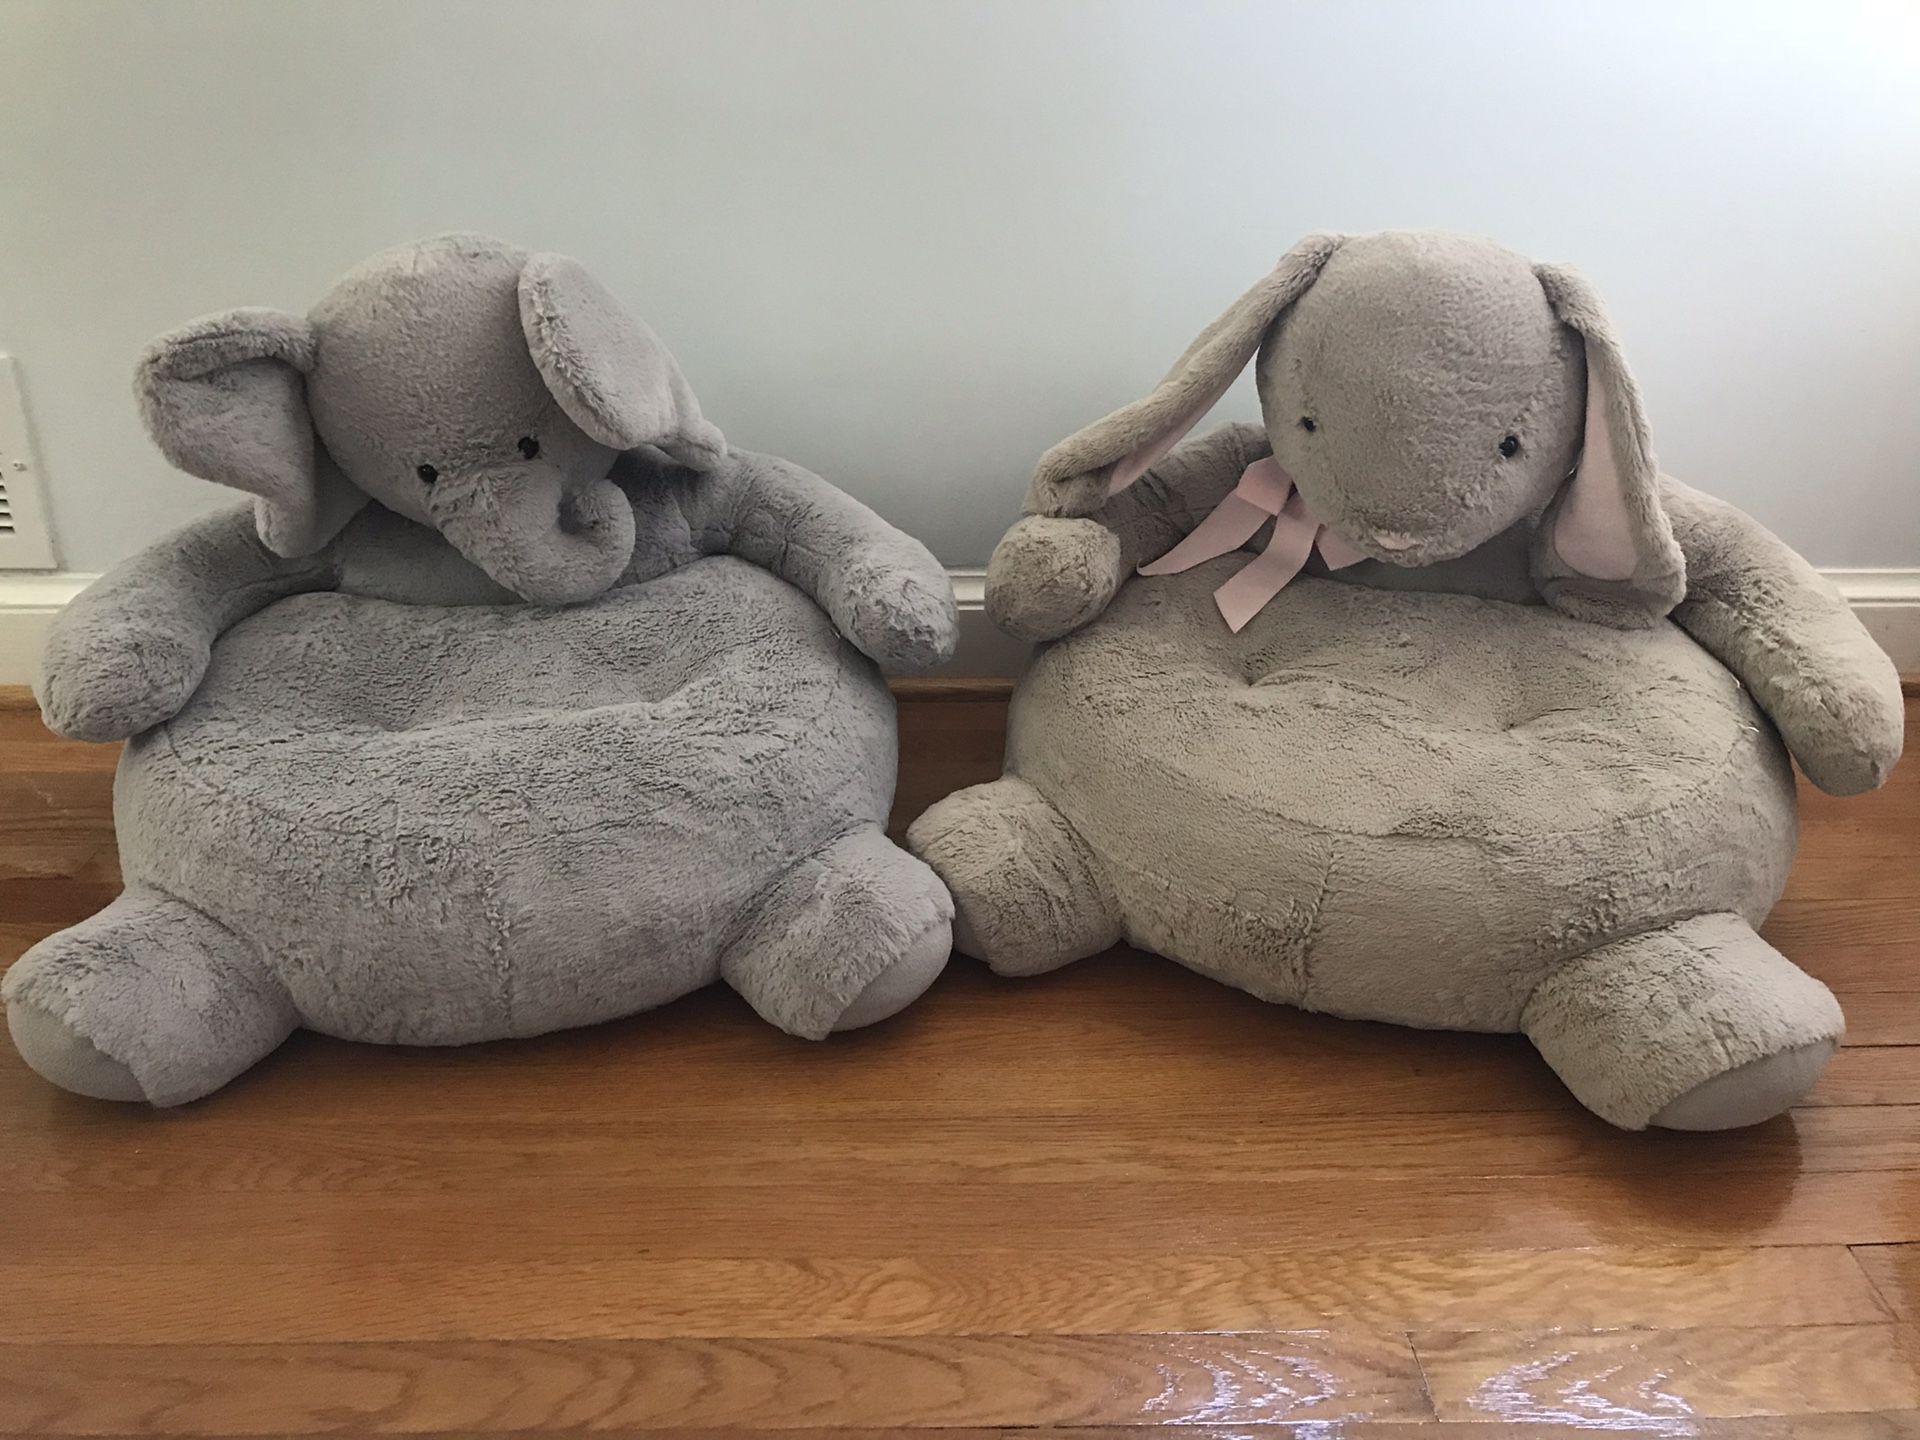 Pottery Barn baby critter chairs $75 for both